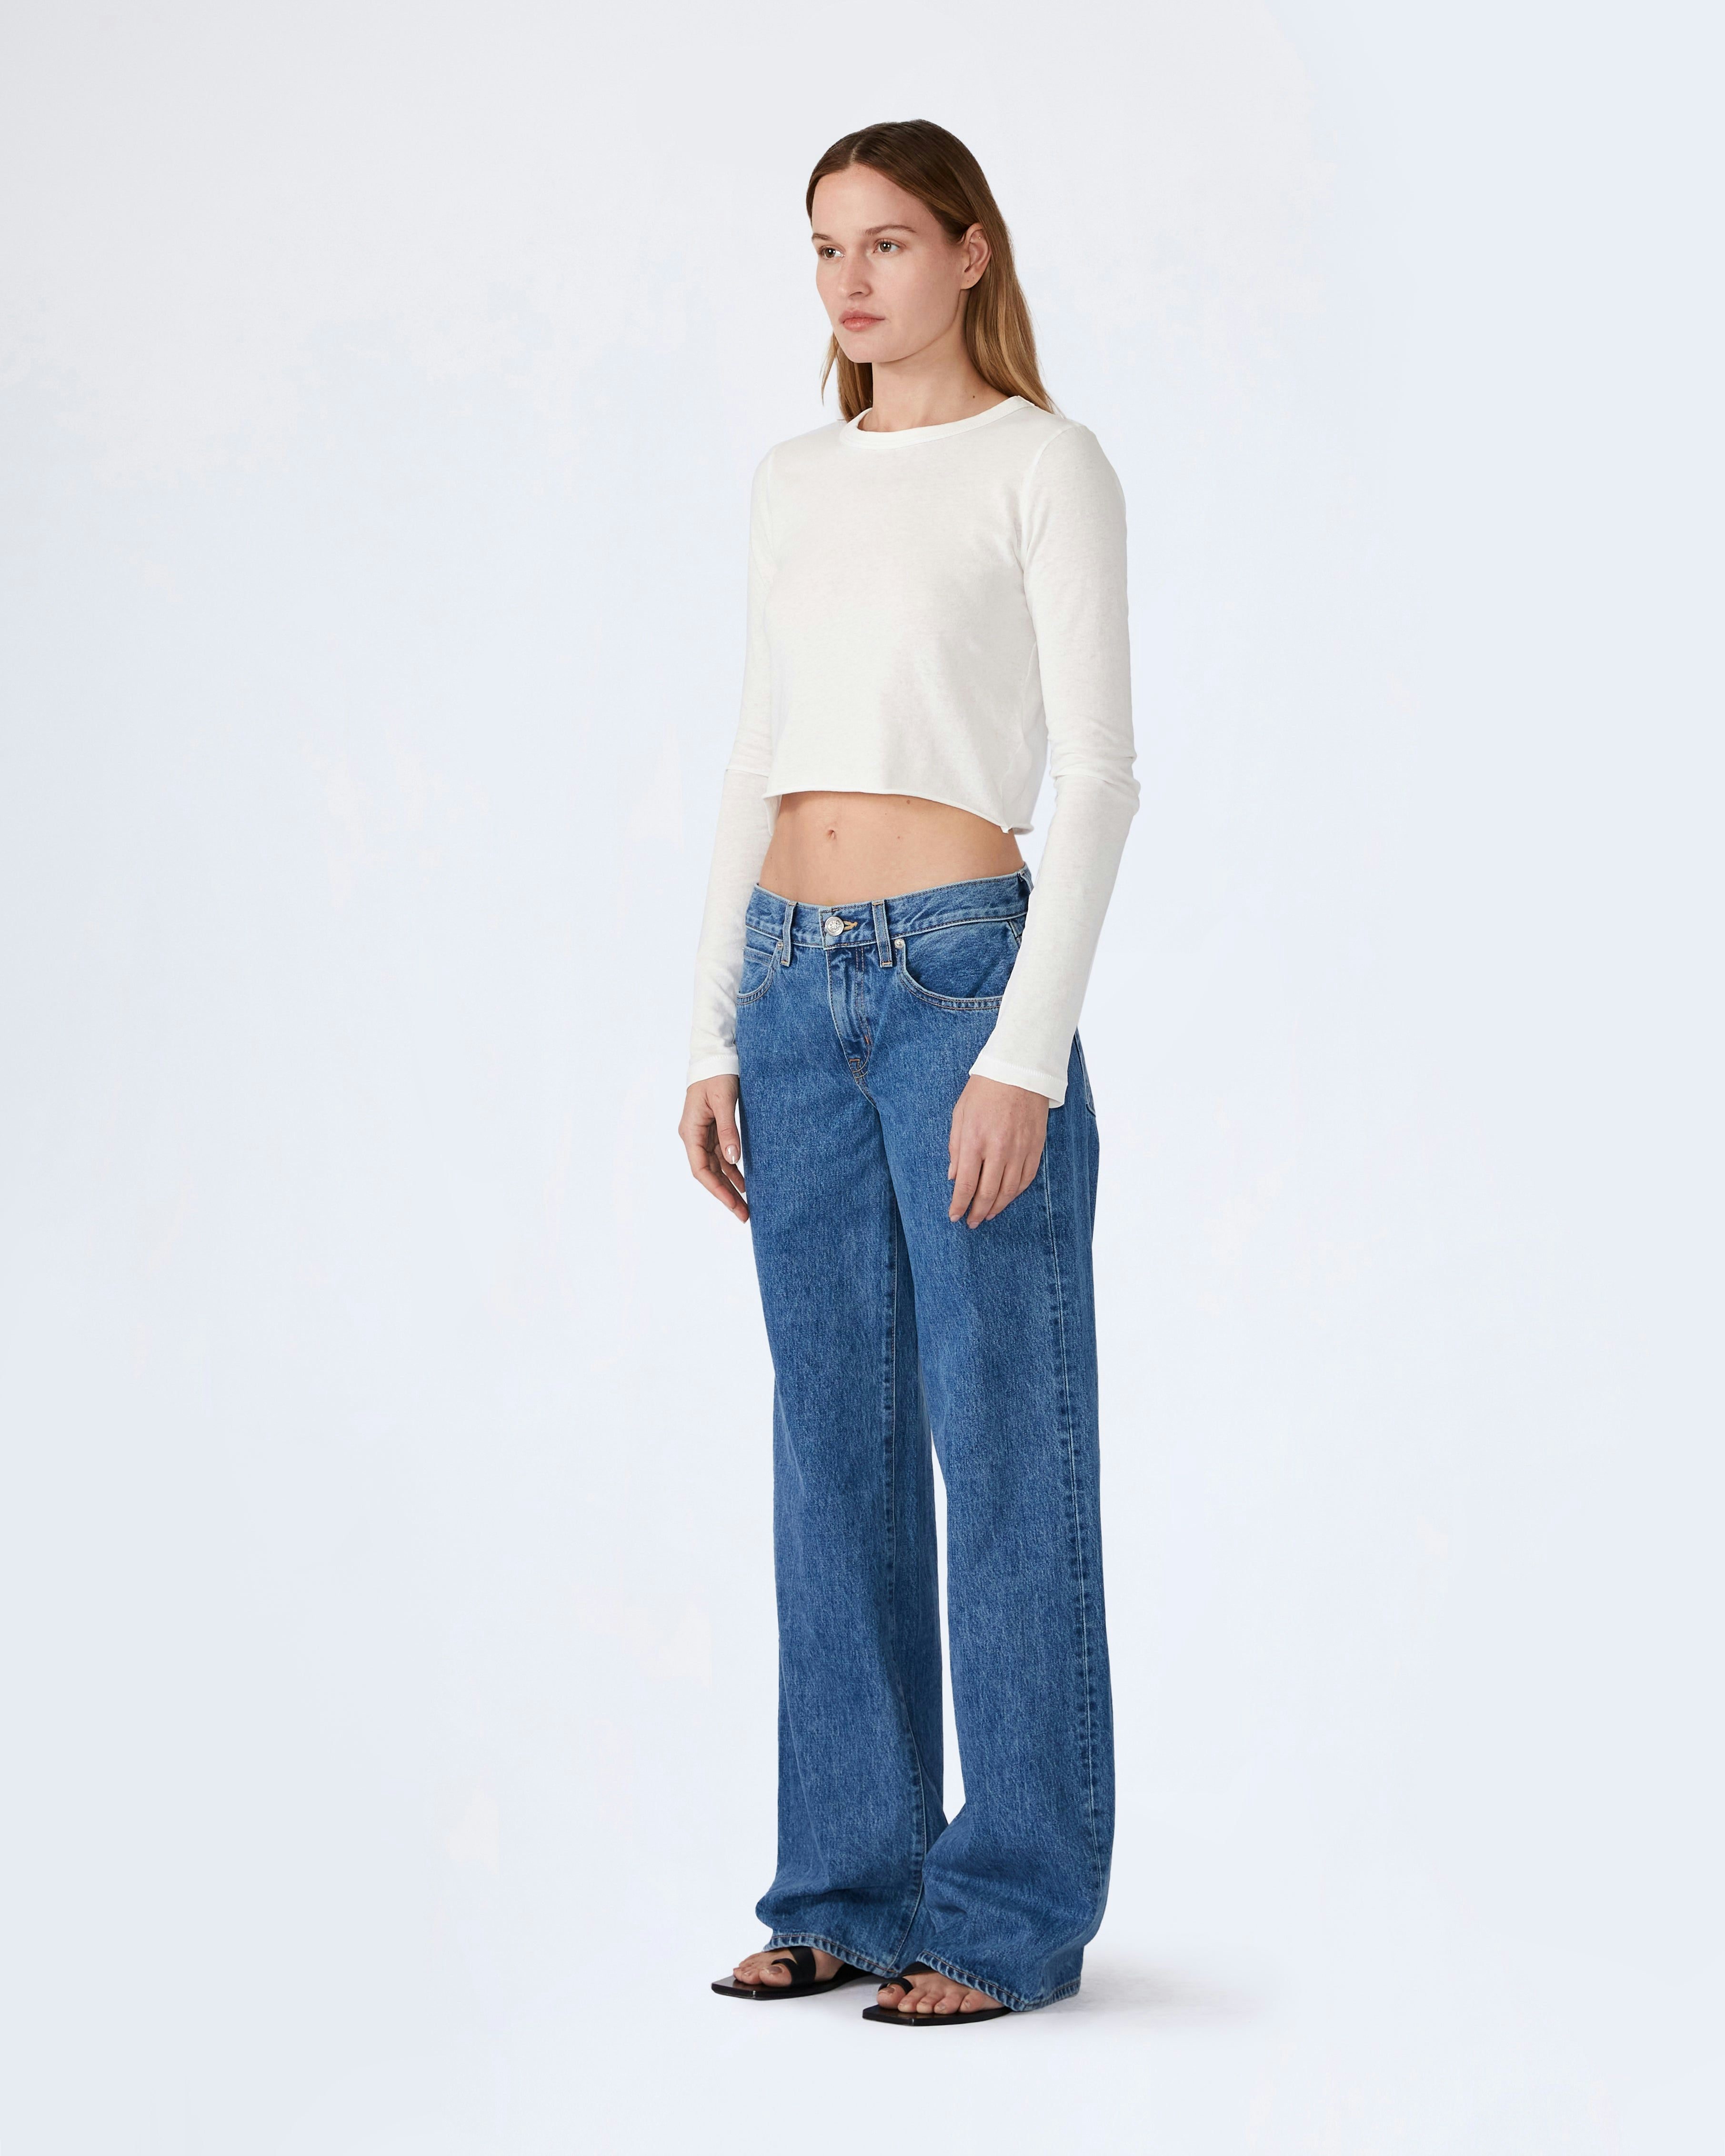 Mica Denim - Cropped Wide Leg With Front Pocket Jeans - MBE